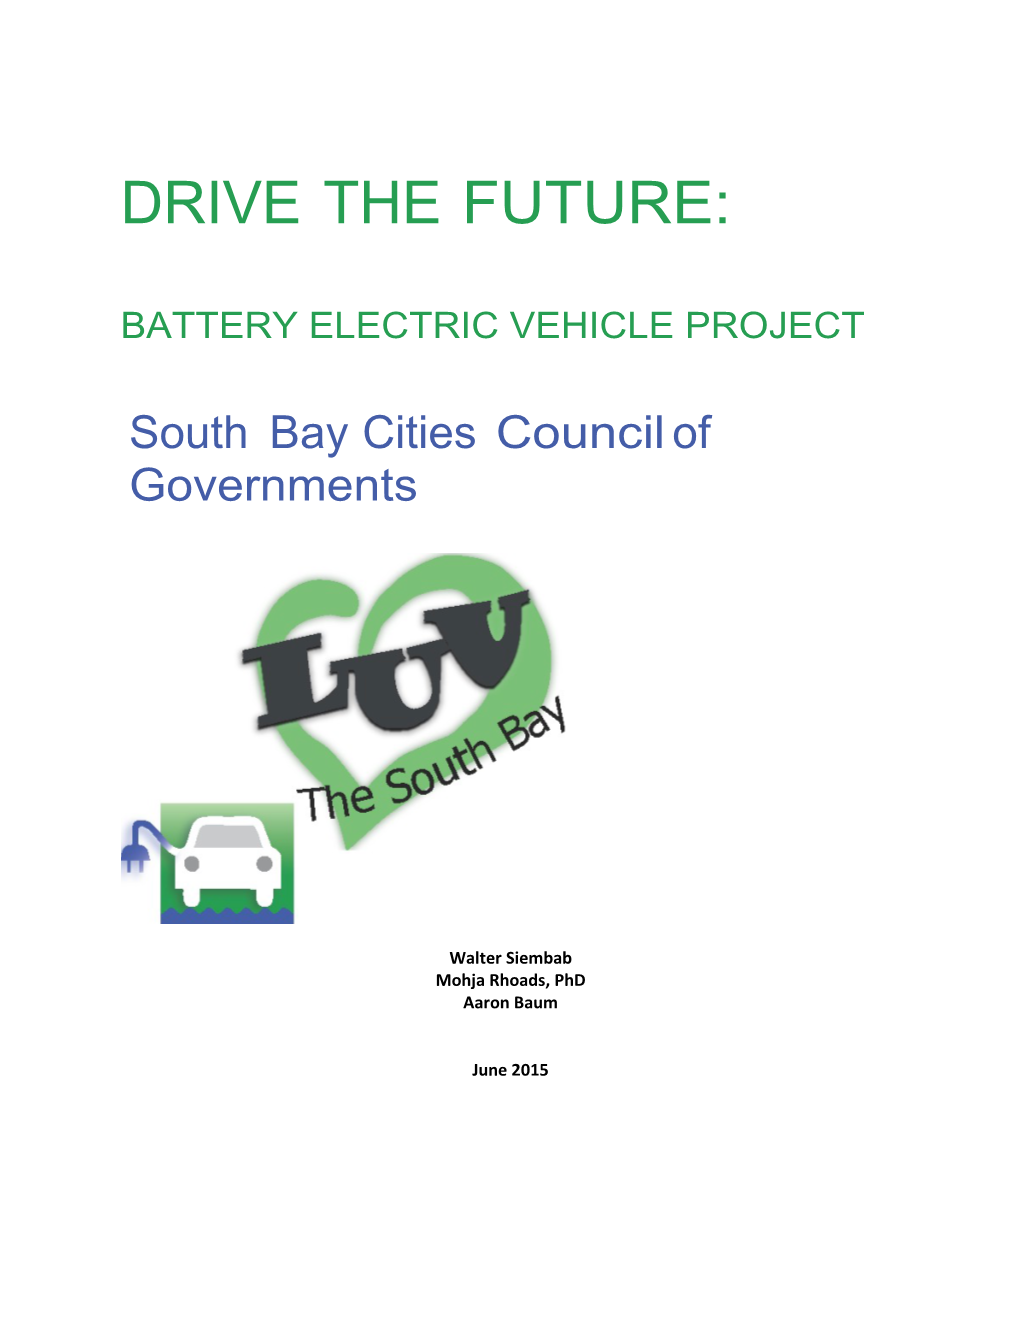 Battery Electric Vehicle Demonstration: Drive the Future